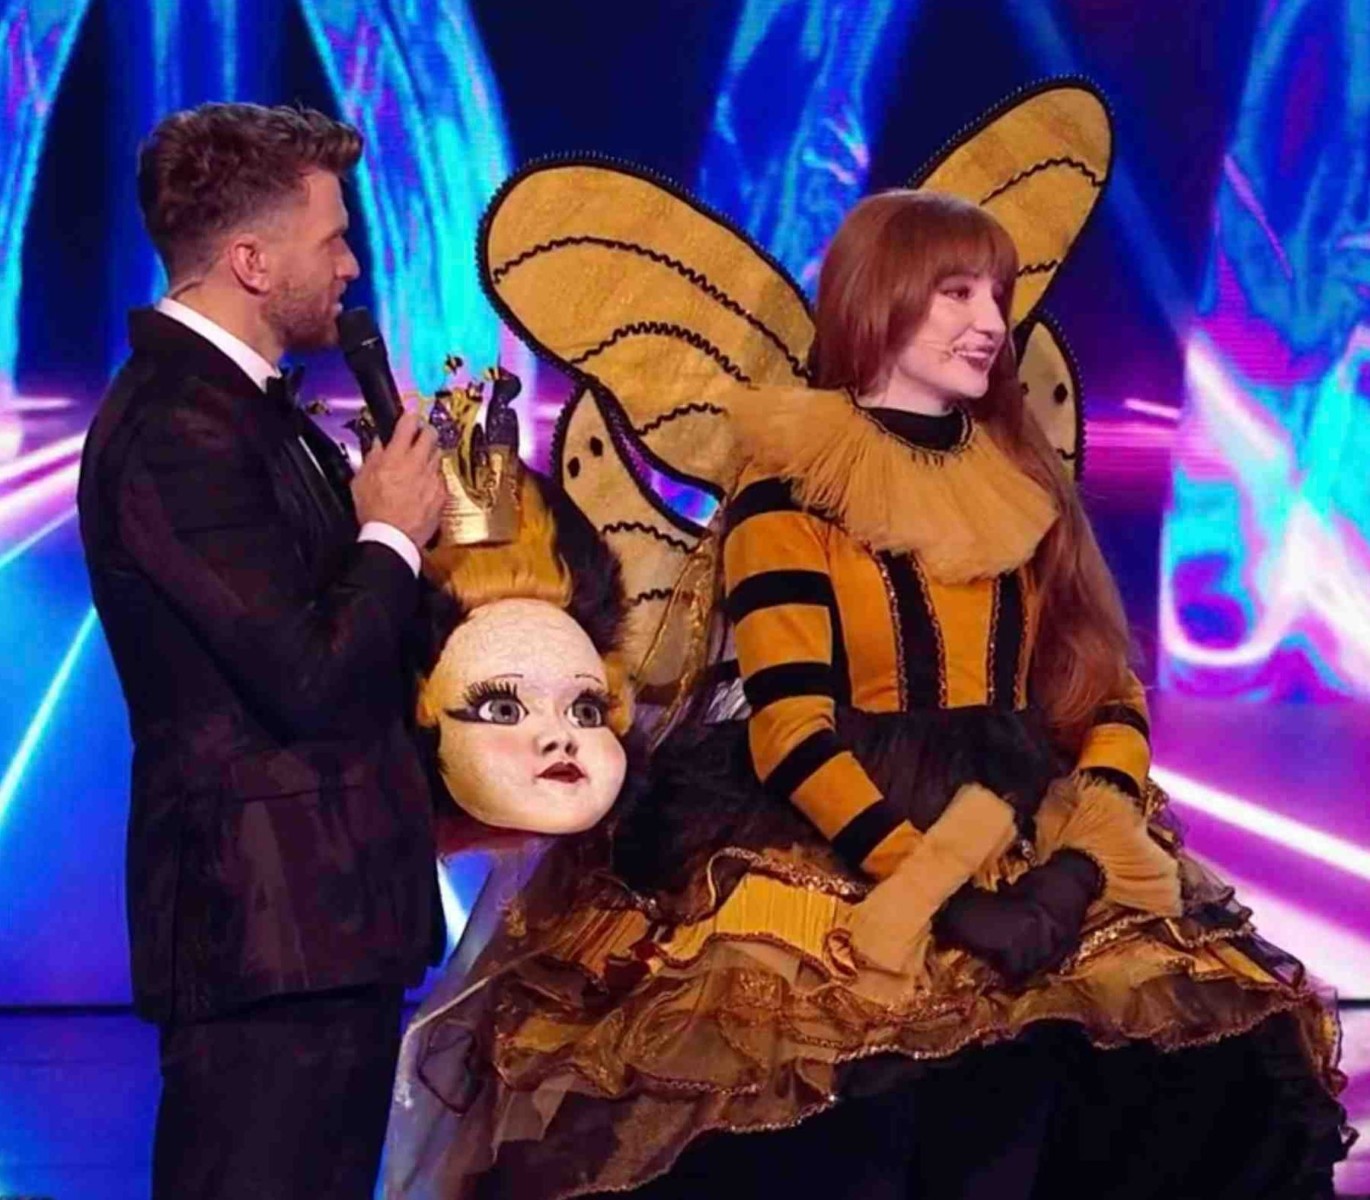 Nicola Roberts says she wasn't nervous about singing on The Masked Singer as she only had to focus on the performance